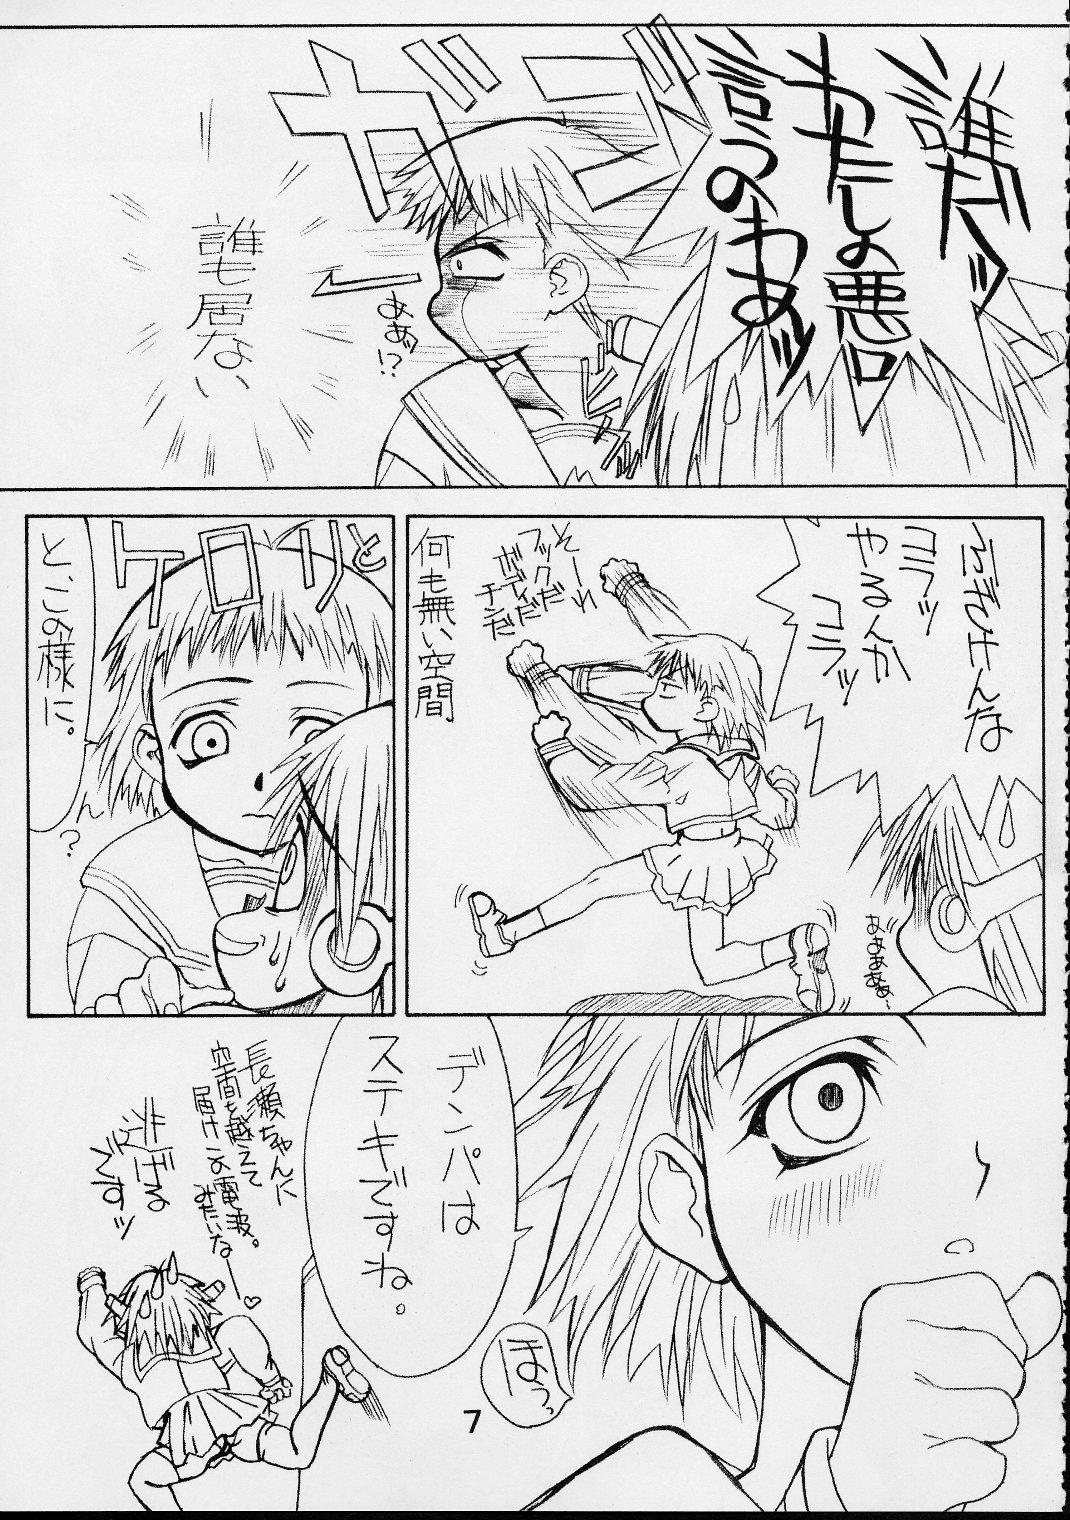 Small Boobs PS Ni SENPAI - King of fighters To heart Angel links Humiliation - Page 6